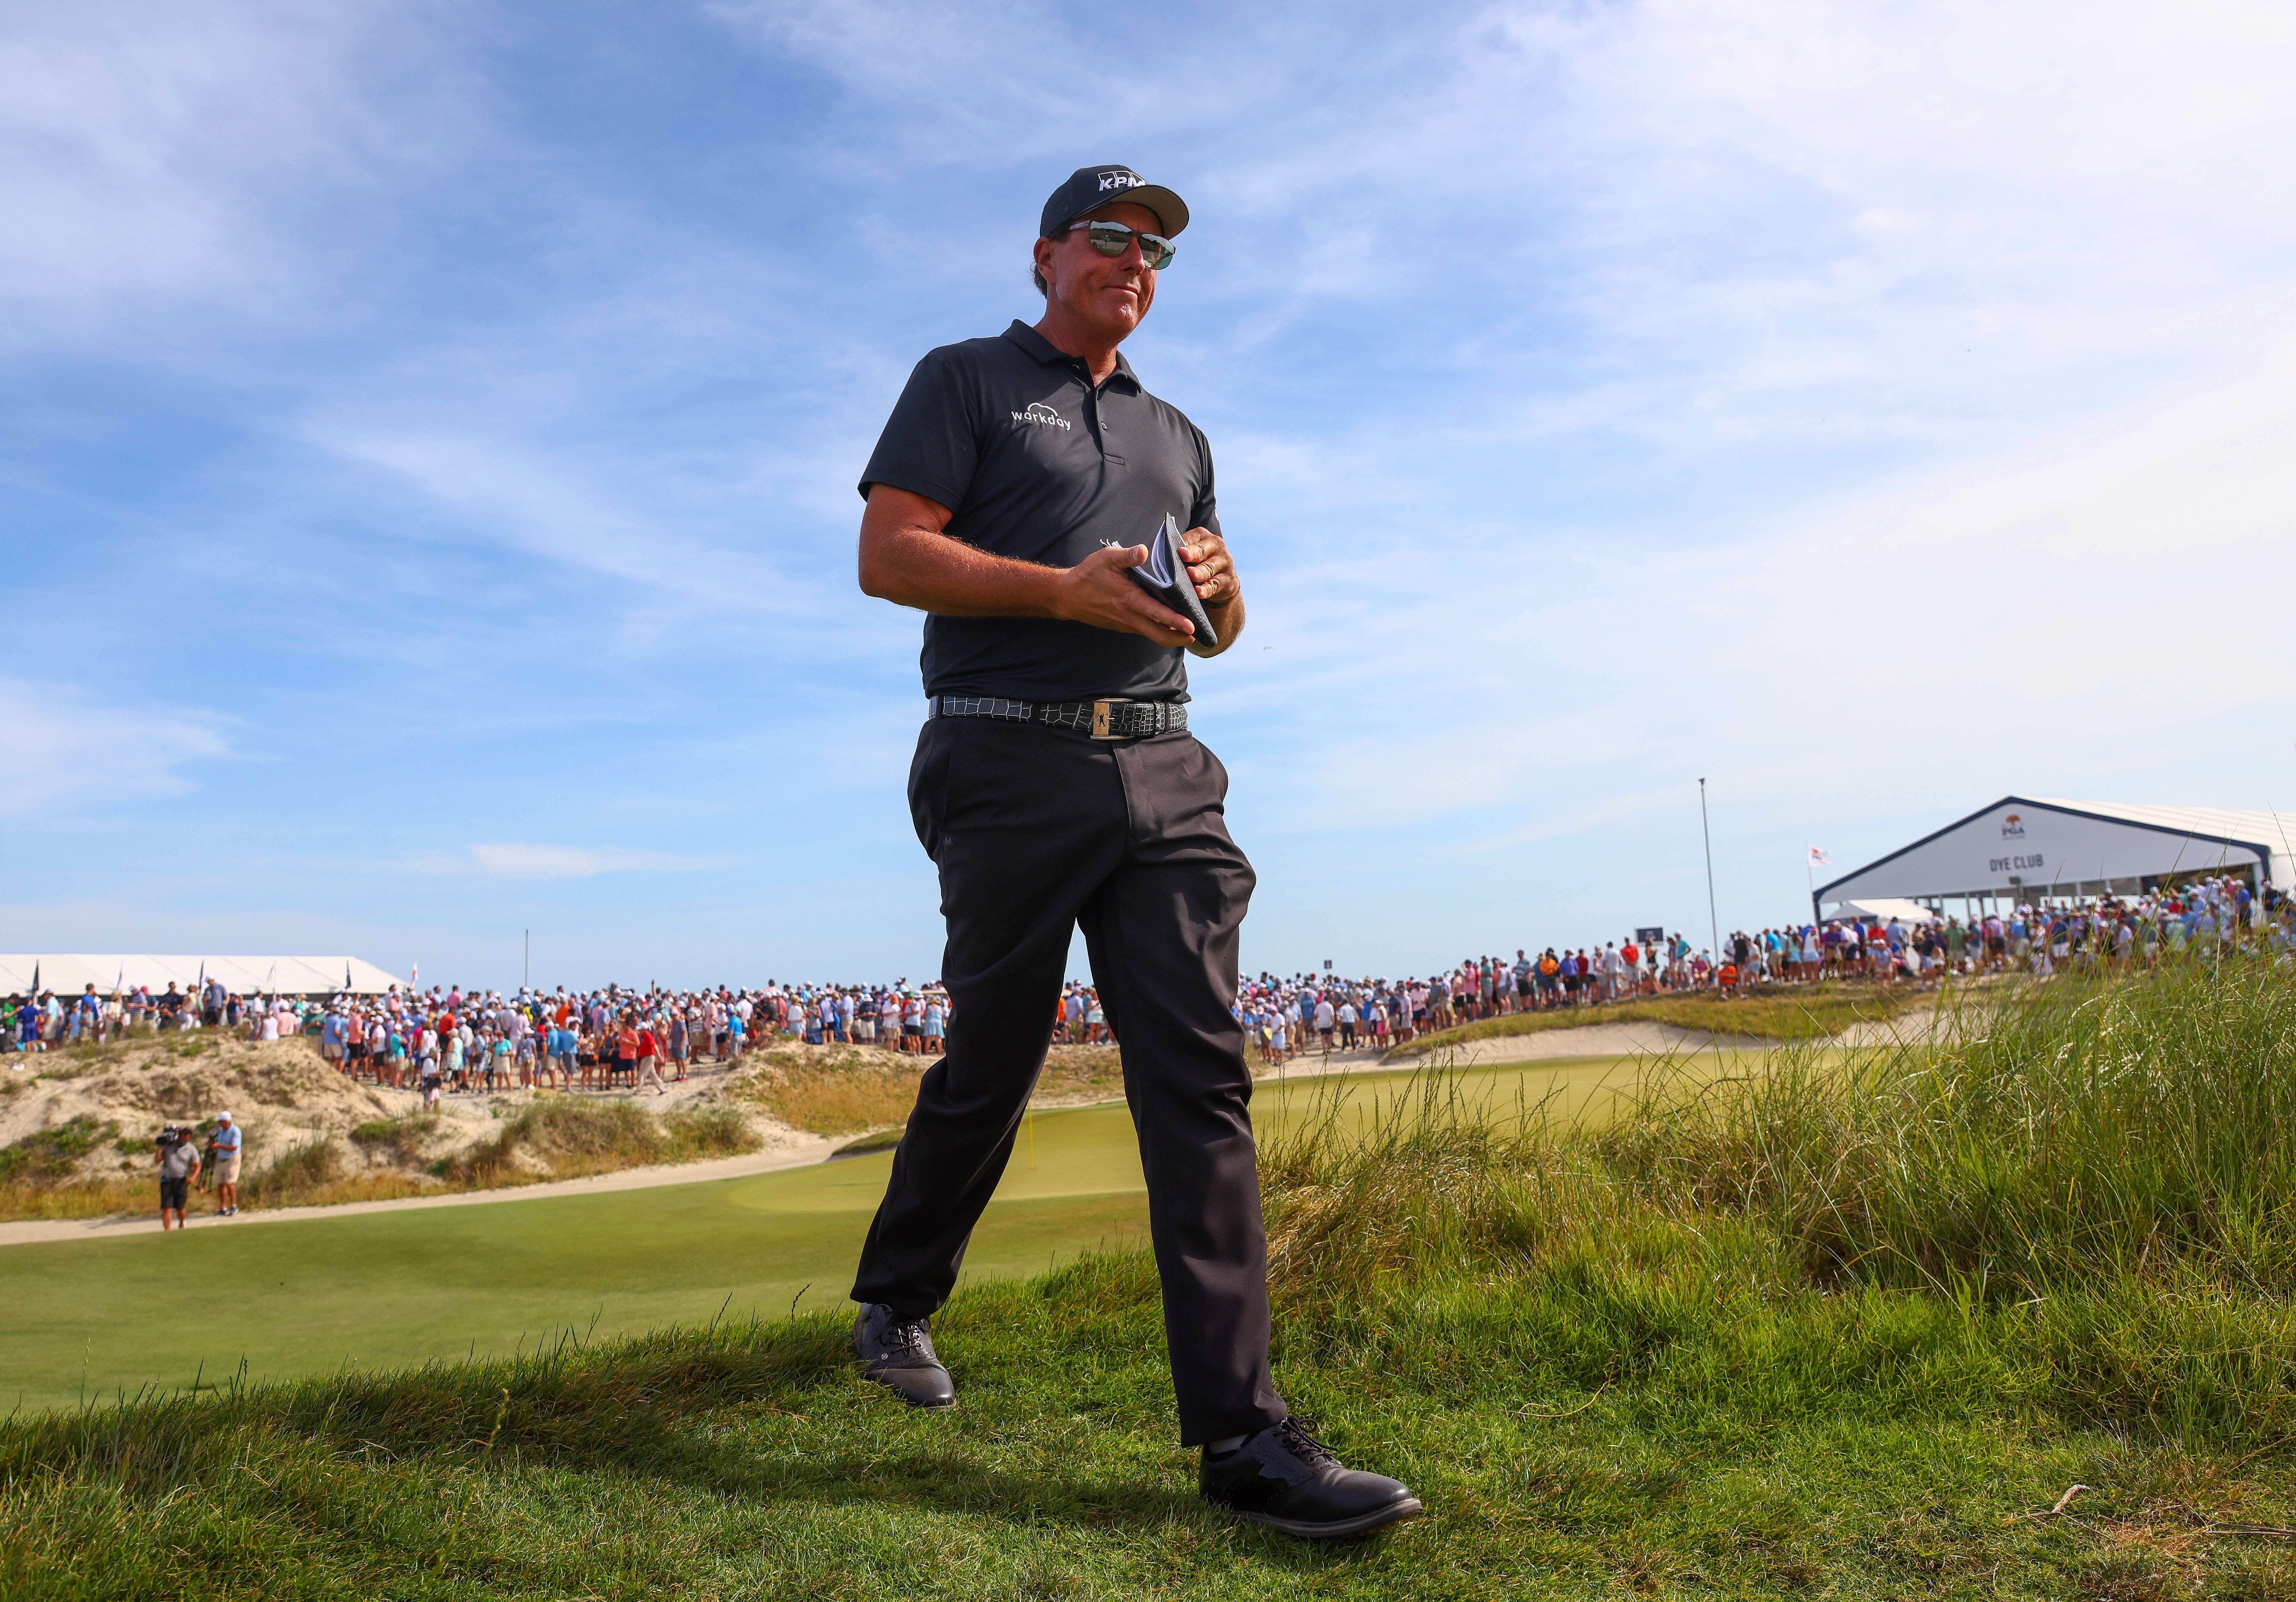 Phil Mickelson leads the PGA Championship going into the final round at Kiawah Island Resort’s Ocean Course. Photo: AFP